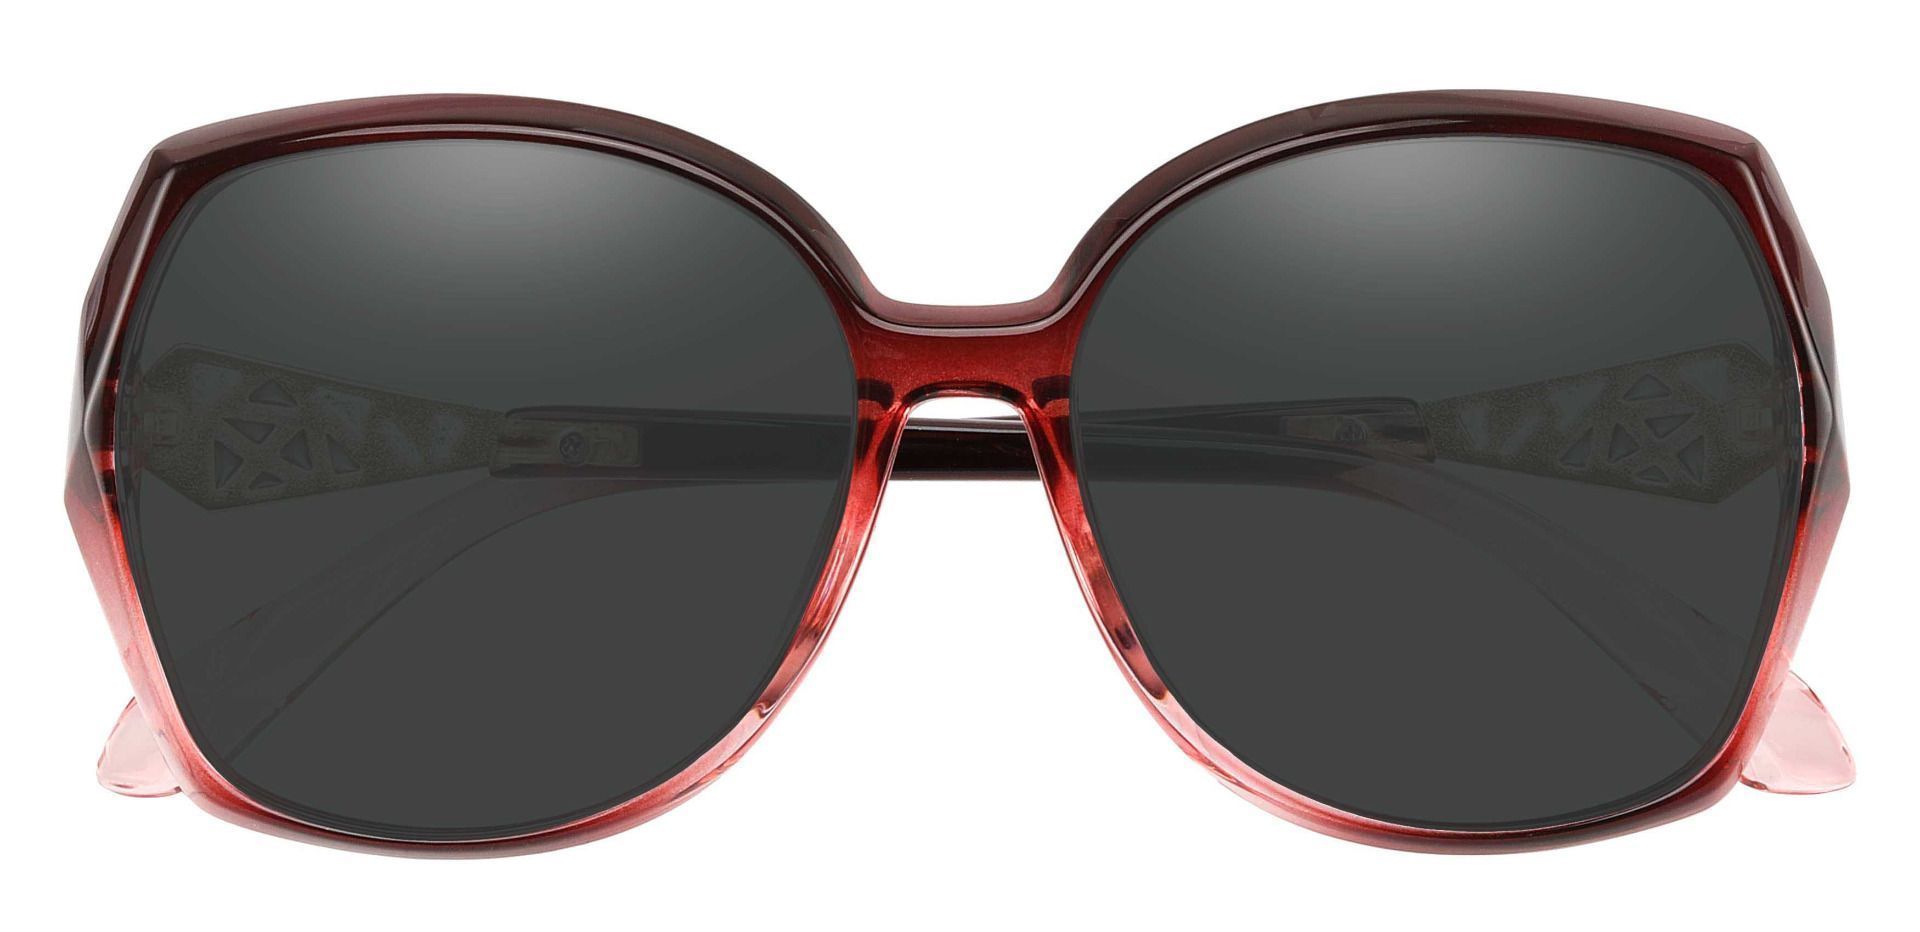 Swan Geometric Reading Sunglasses - Red Frame With Gray Lenses